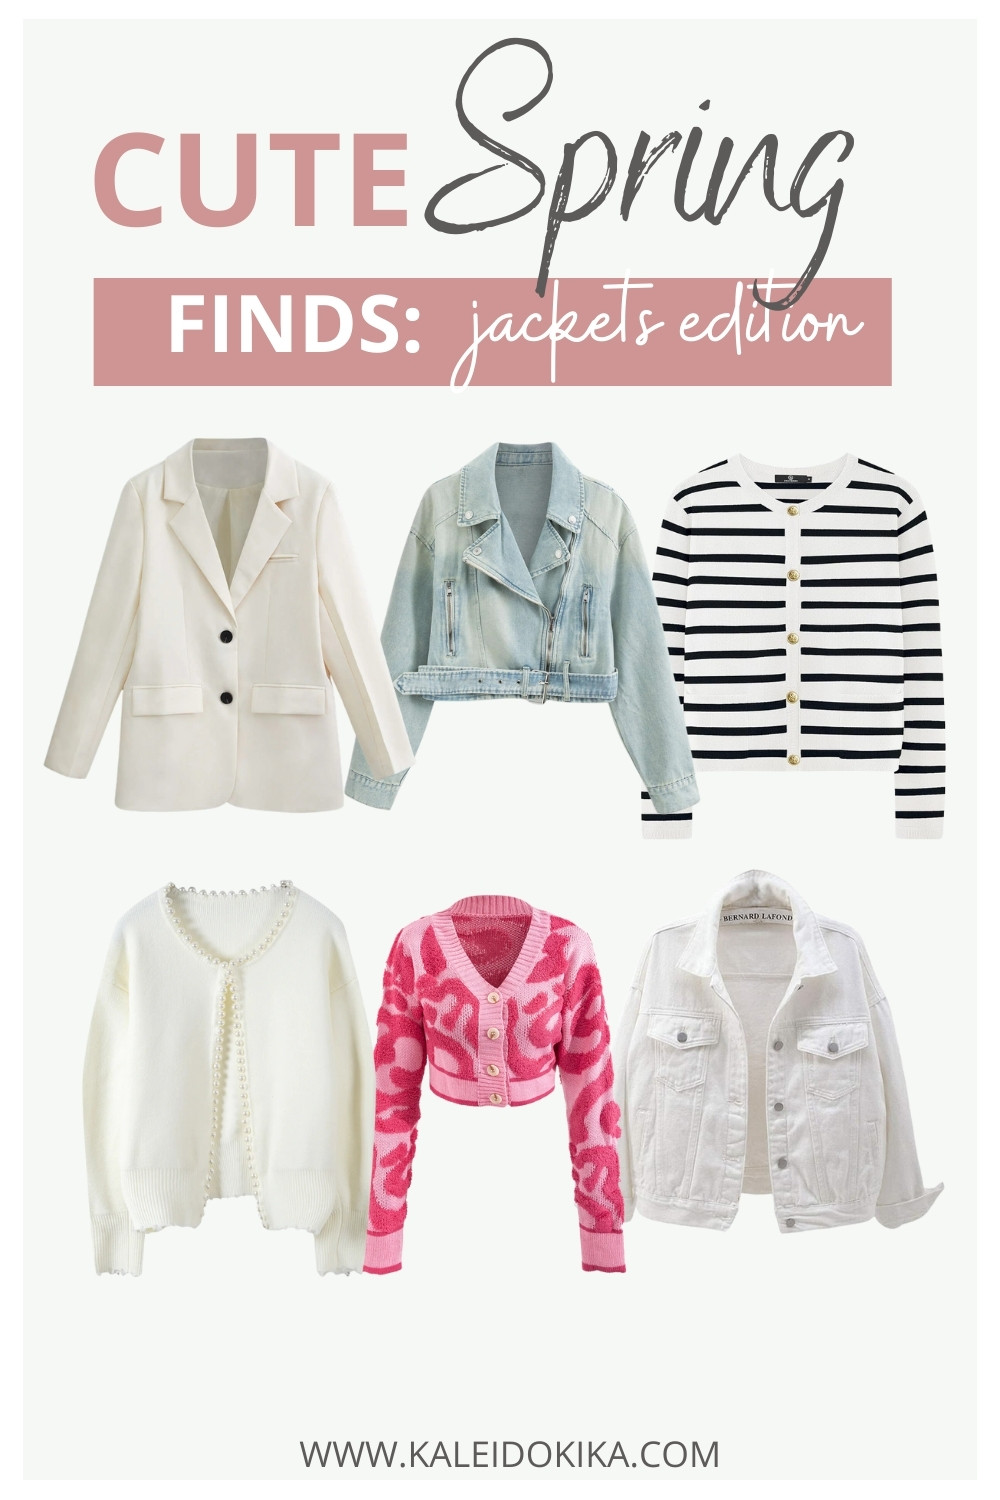 Image showing cute spring jackets